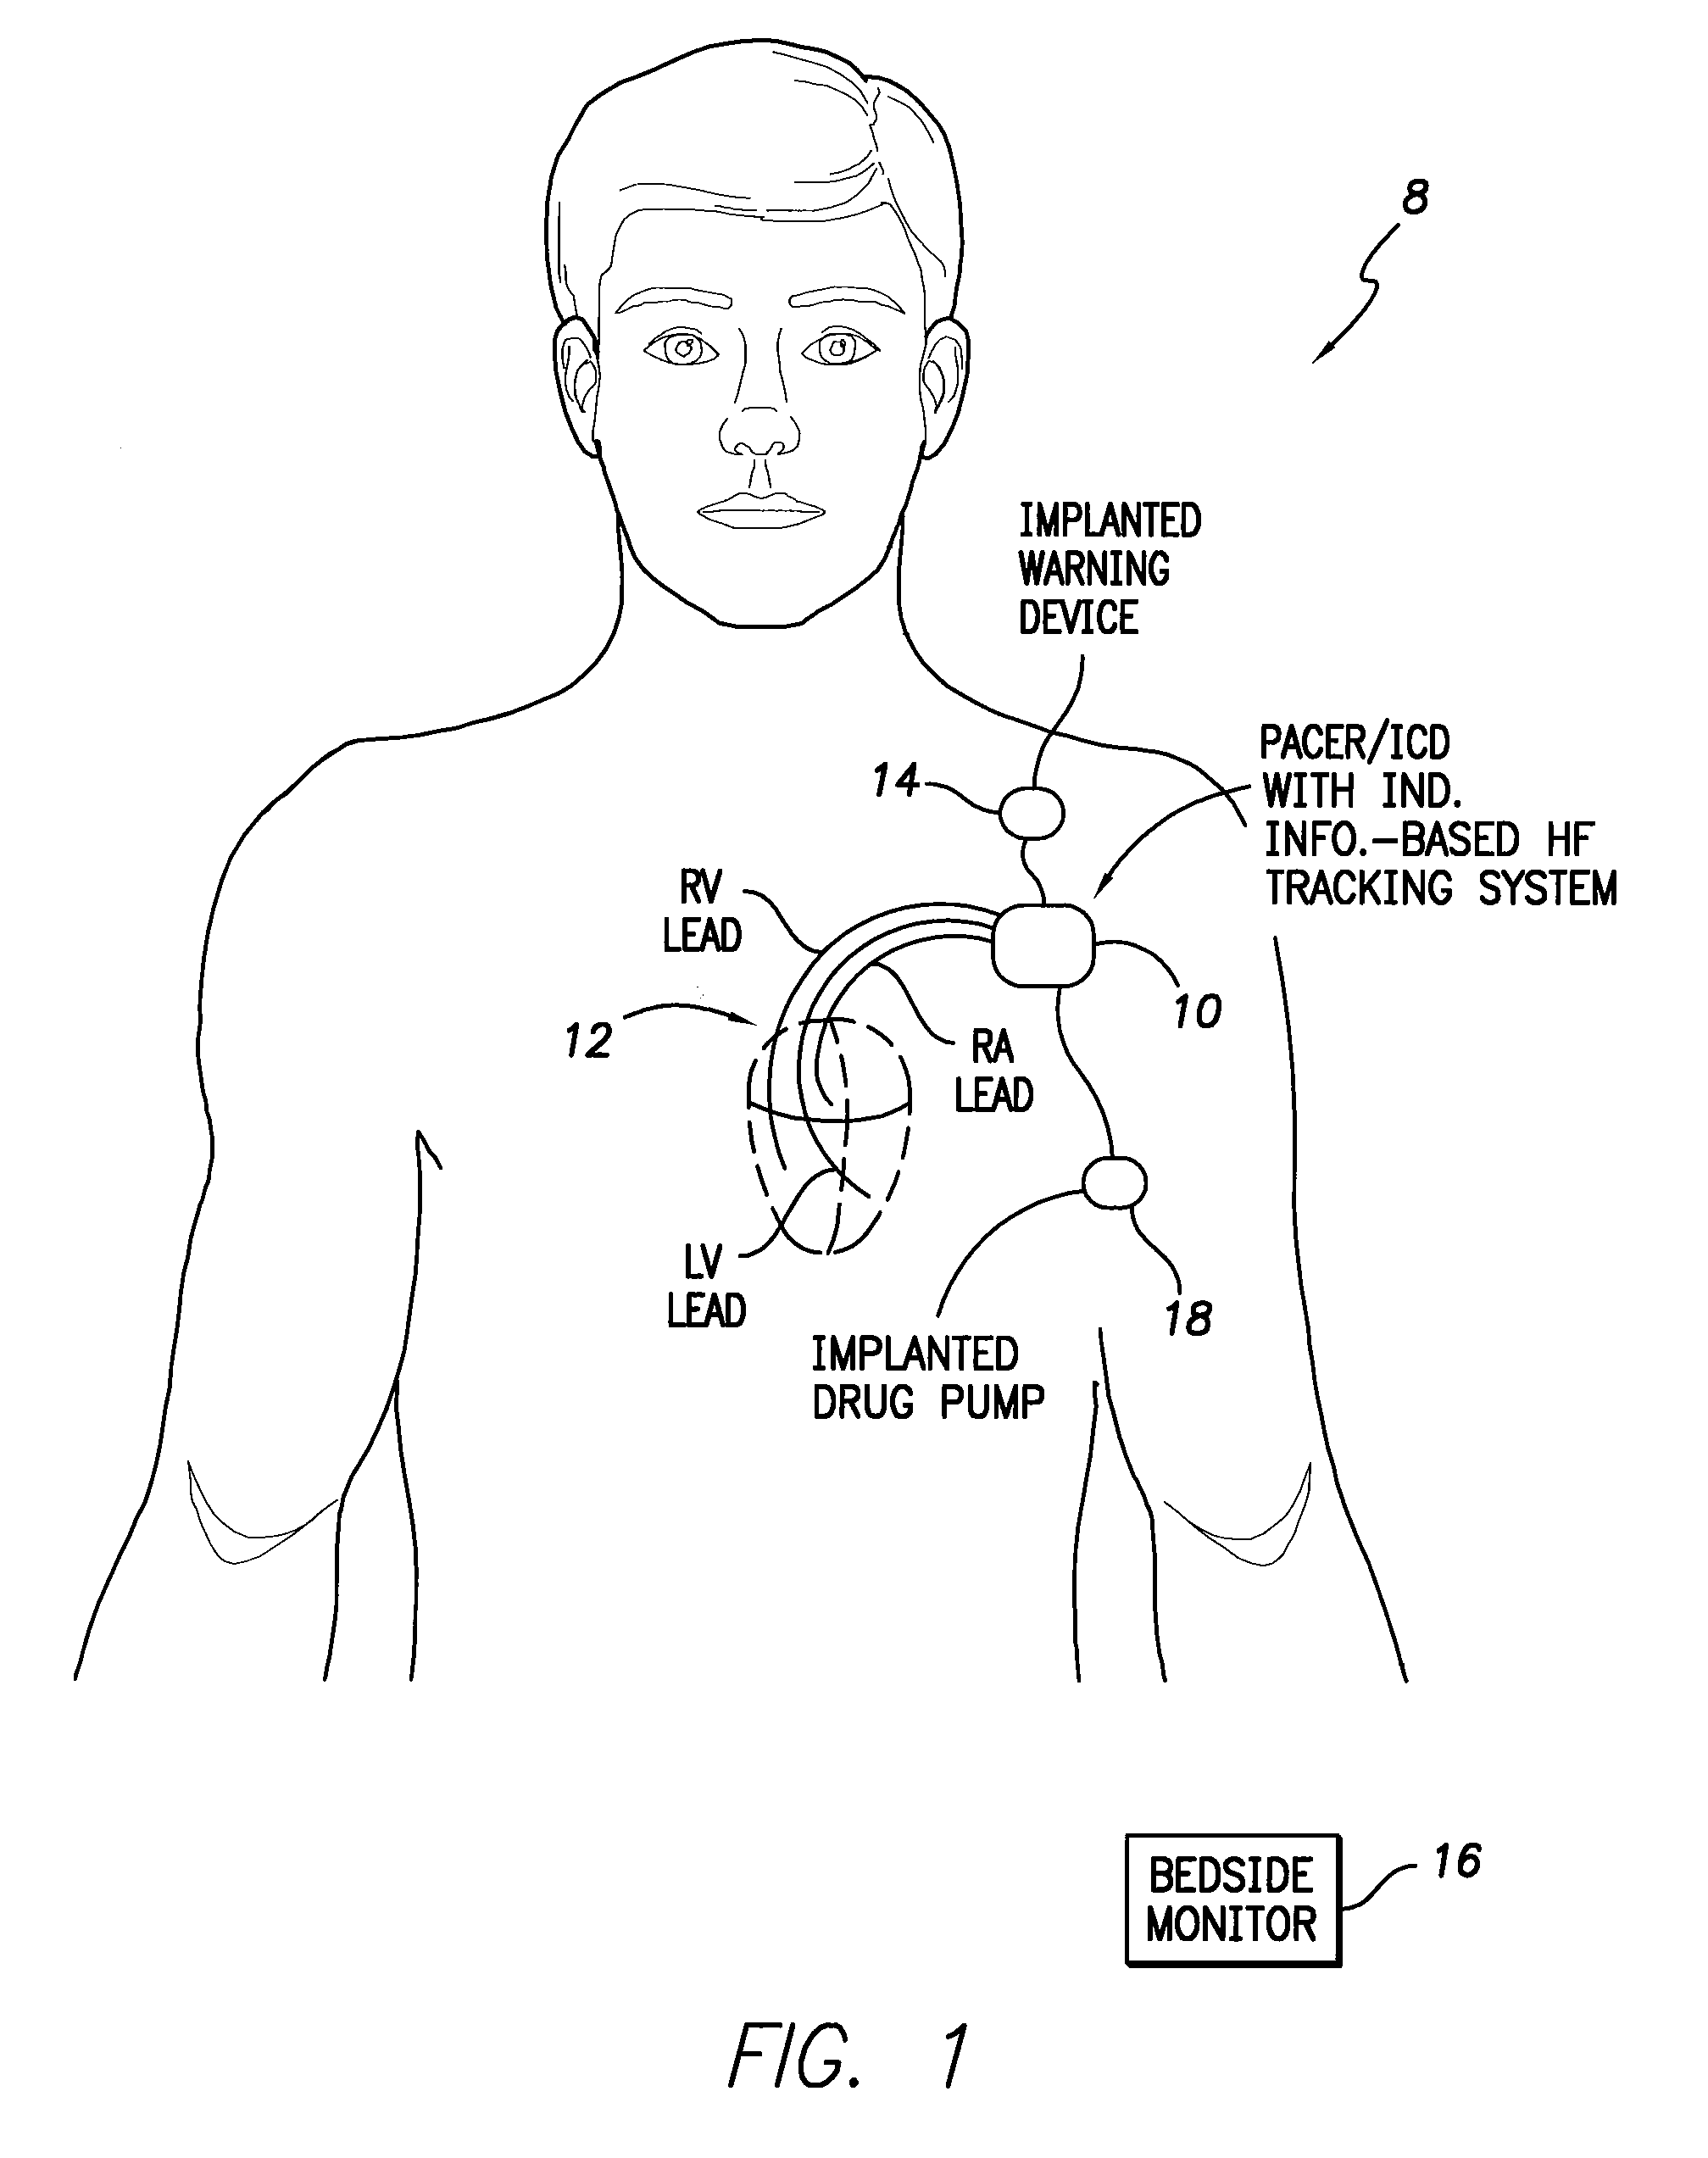 Systems and methods for use by an implantable medical device for detecting heart failure based on the independent information content of immittance vectors